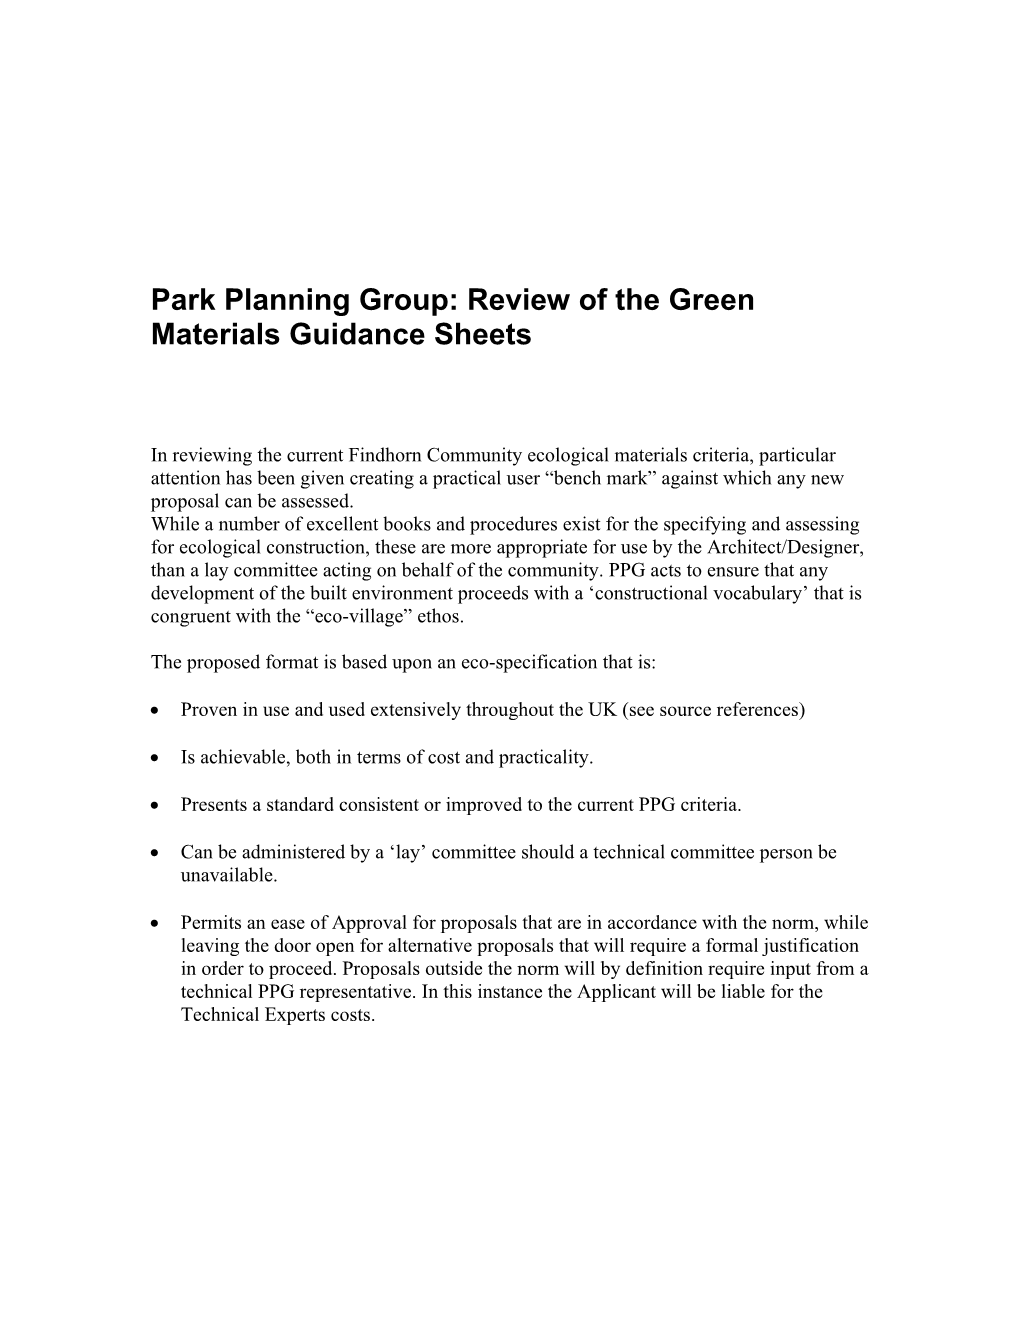 Park Planning Group: Review of the Green Materials Guidance Sheets